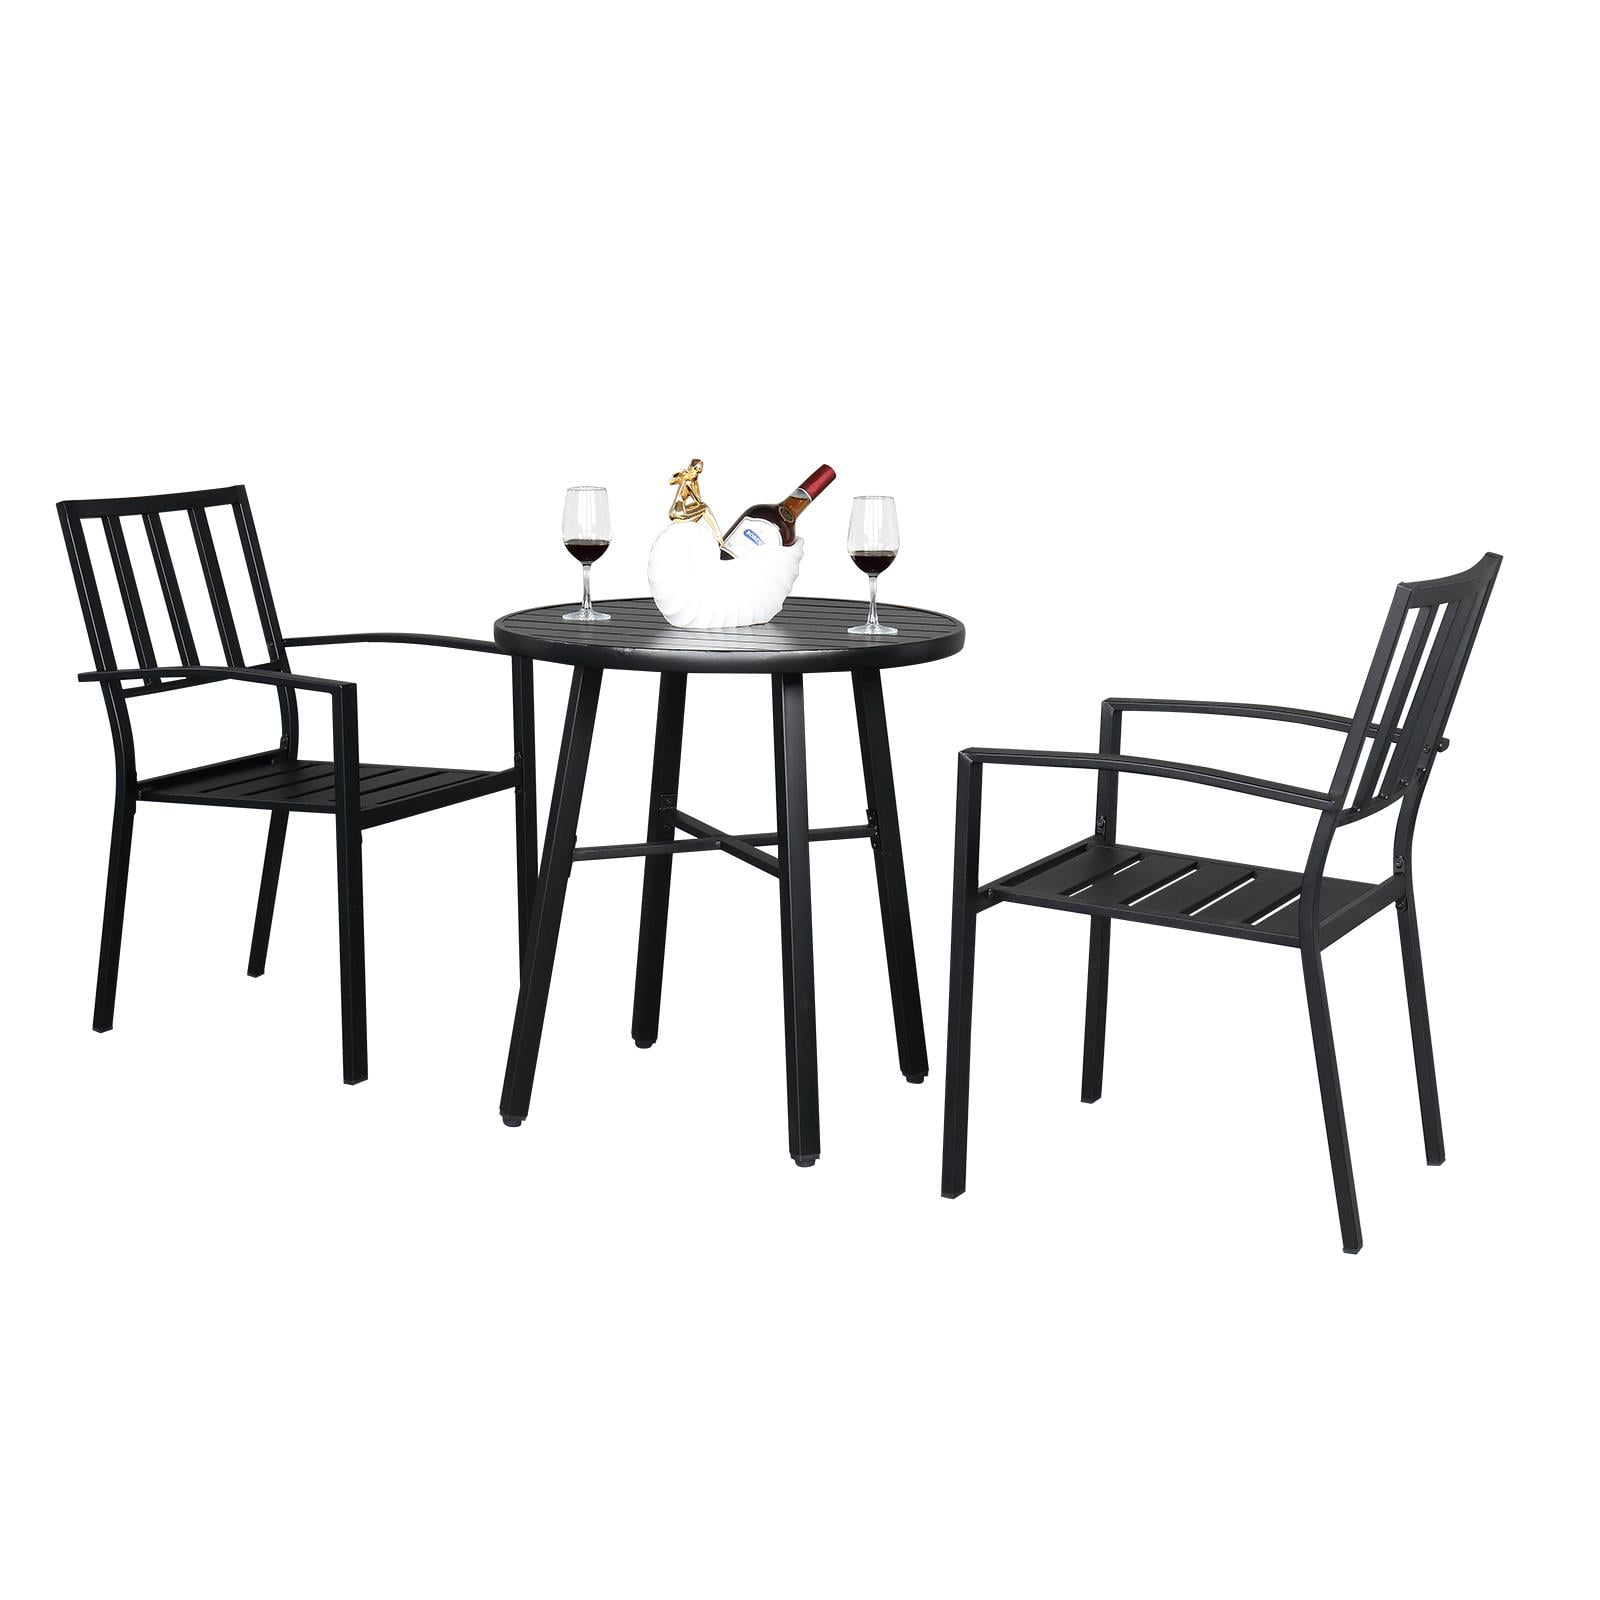 Ktaxon 3-Piece Outdoor Furniture Dining Set, All-Weather